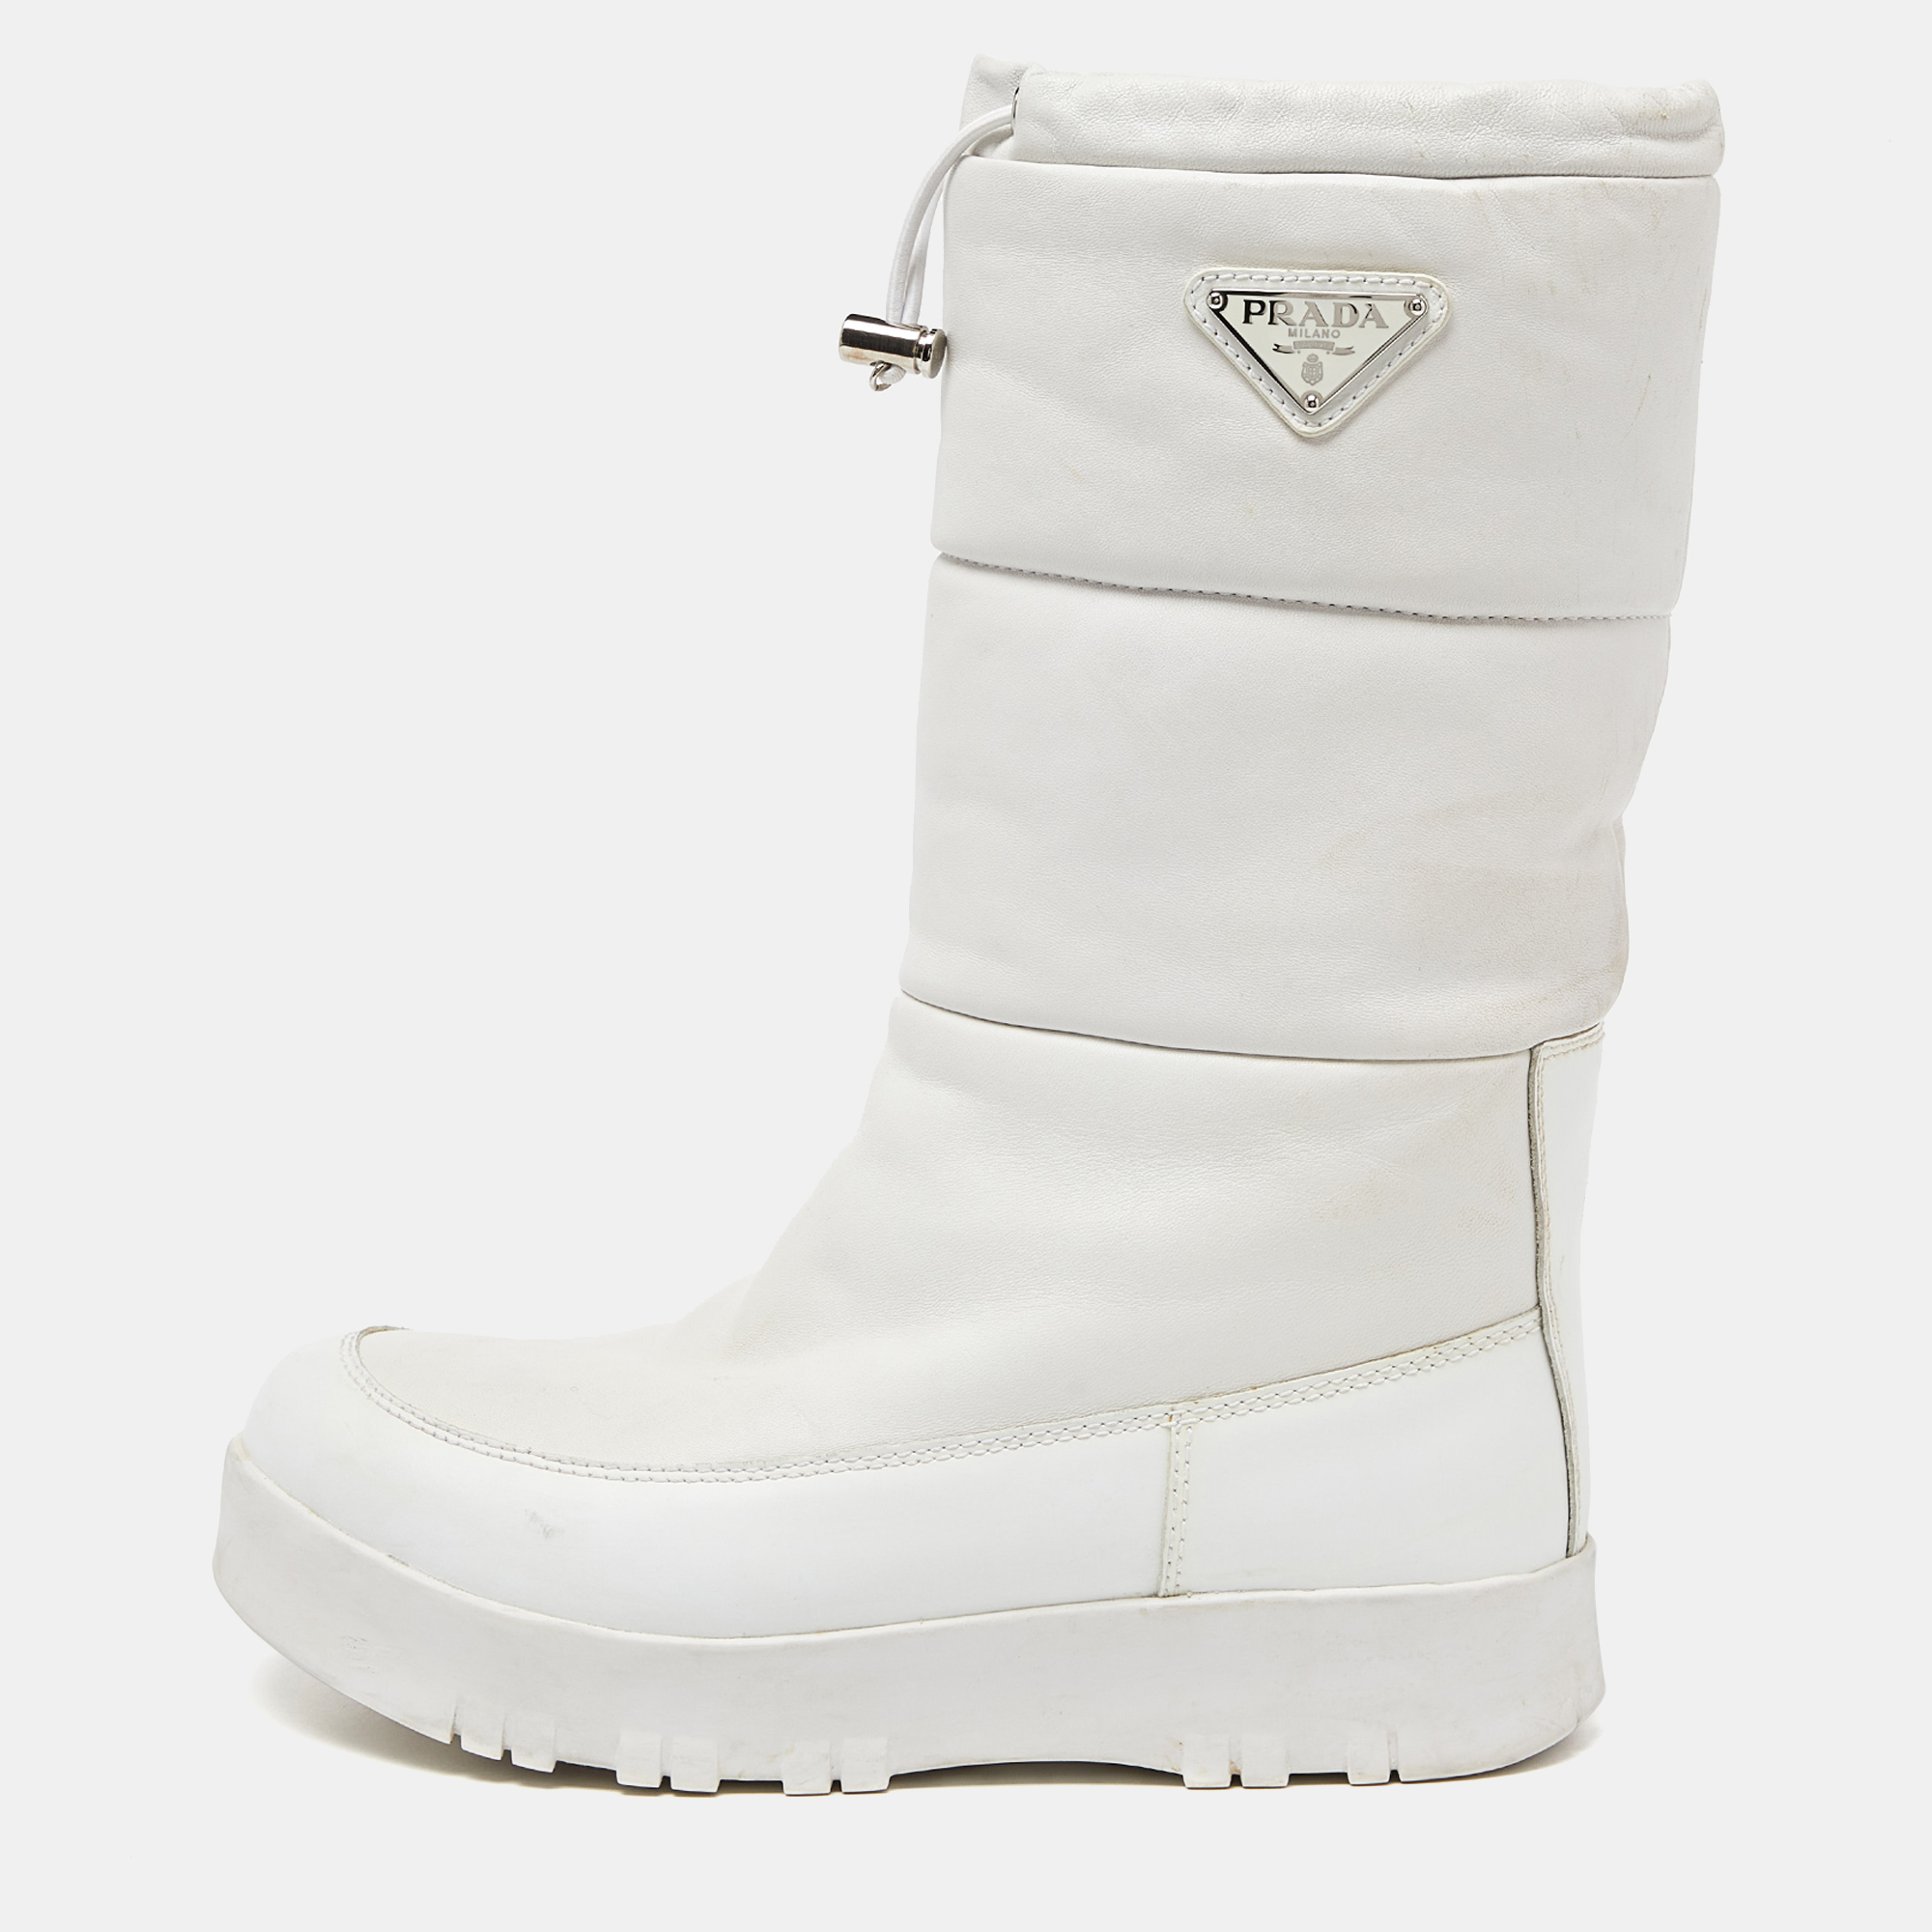 Pre-owned Prada White Leather Mid Calf Boots Size 39.5